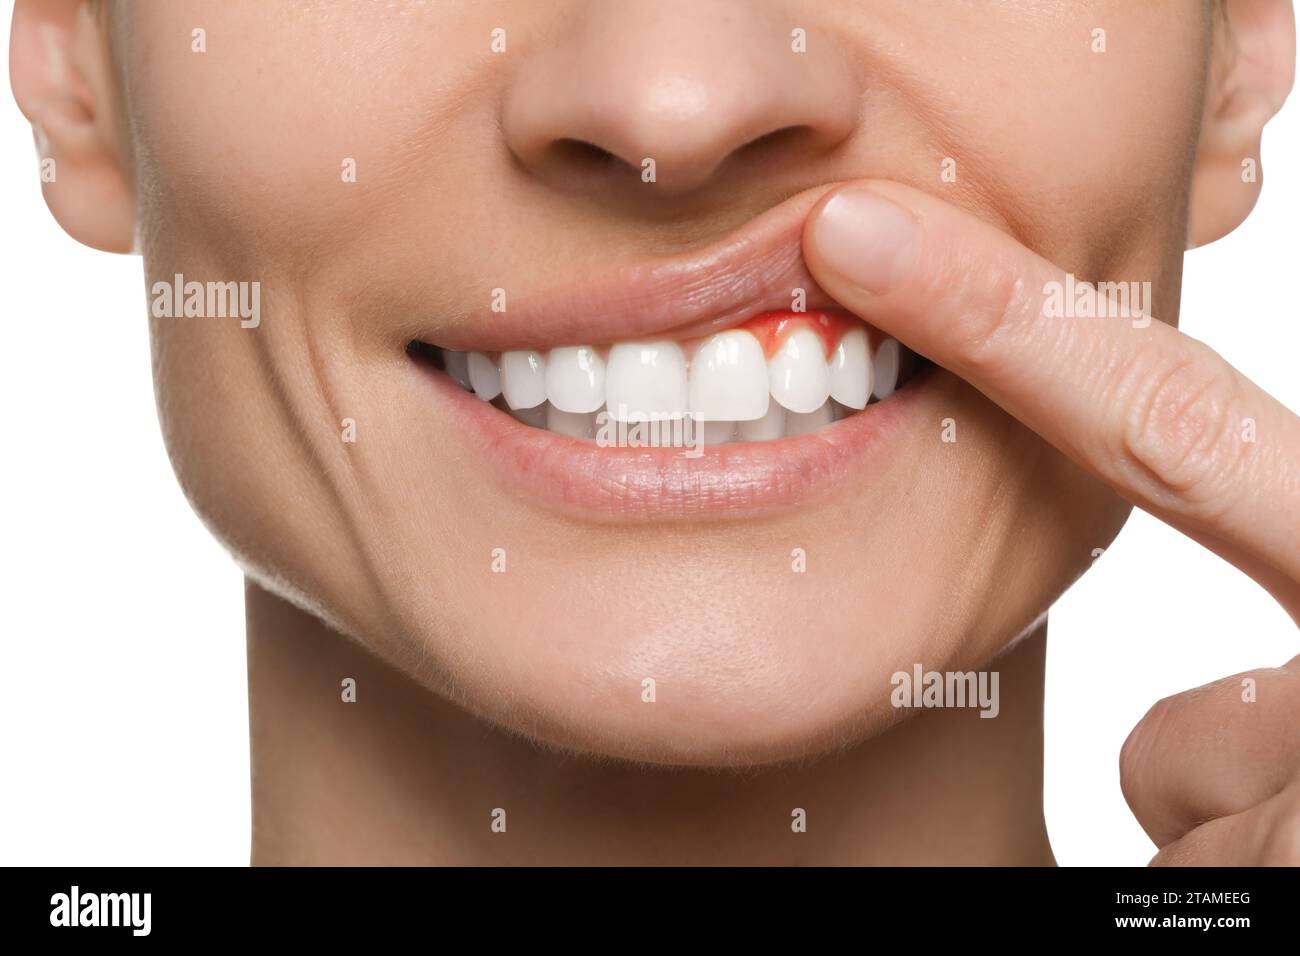 Woman showing inflamed gum on white background, closeup Stock Photo